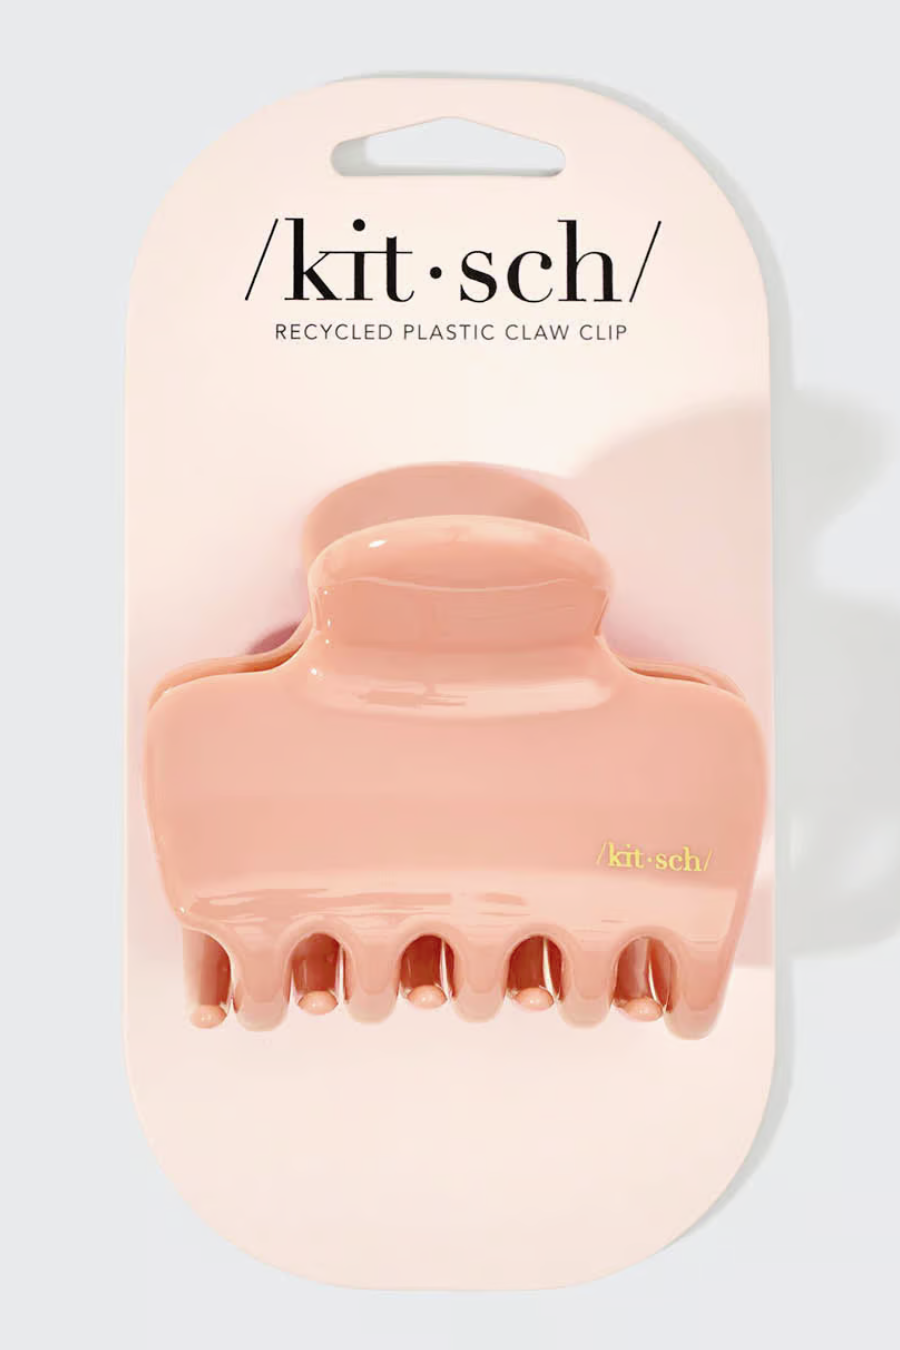 blush claw clip on it's packaging 